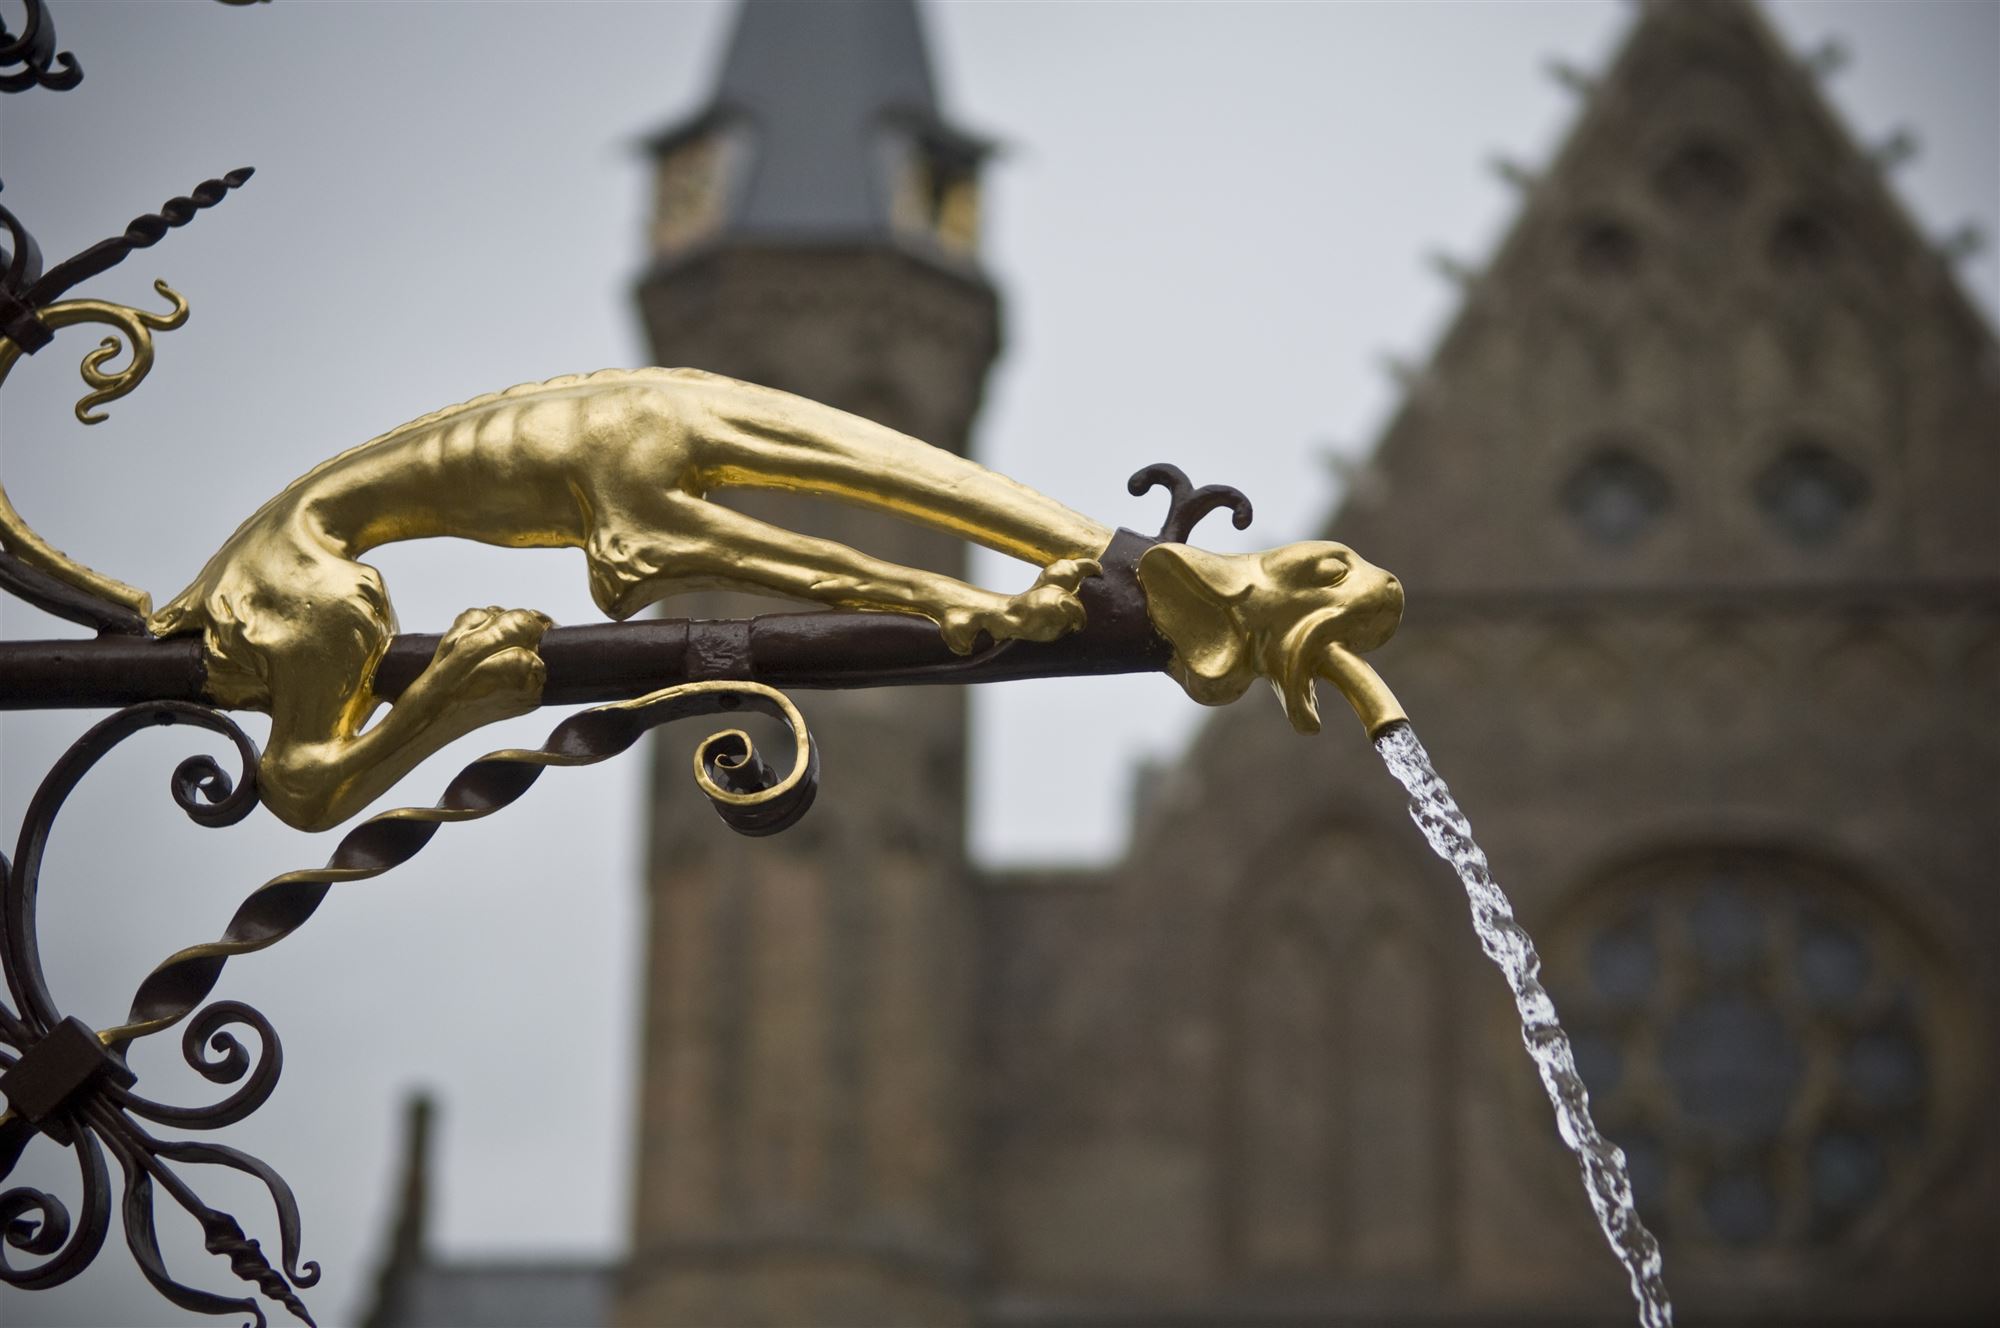 Did you know that the neo-Gothic fountain at Binnenhof in The Hague was originally designed for the World Exhibition in Amsterdam in 1883?